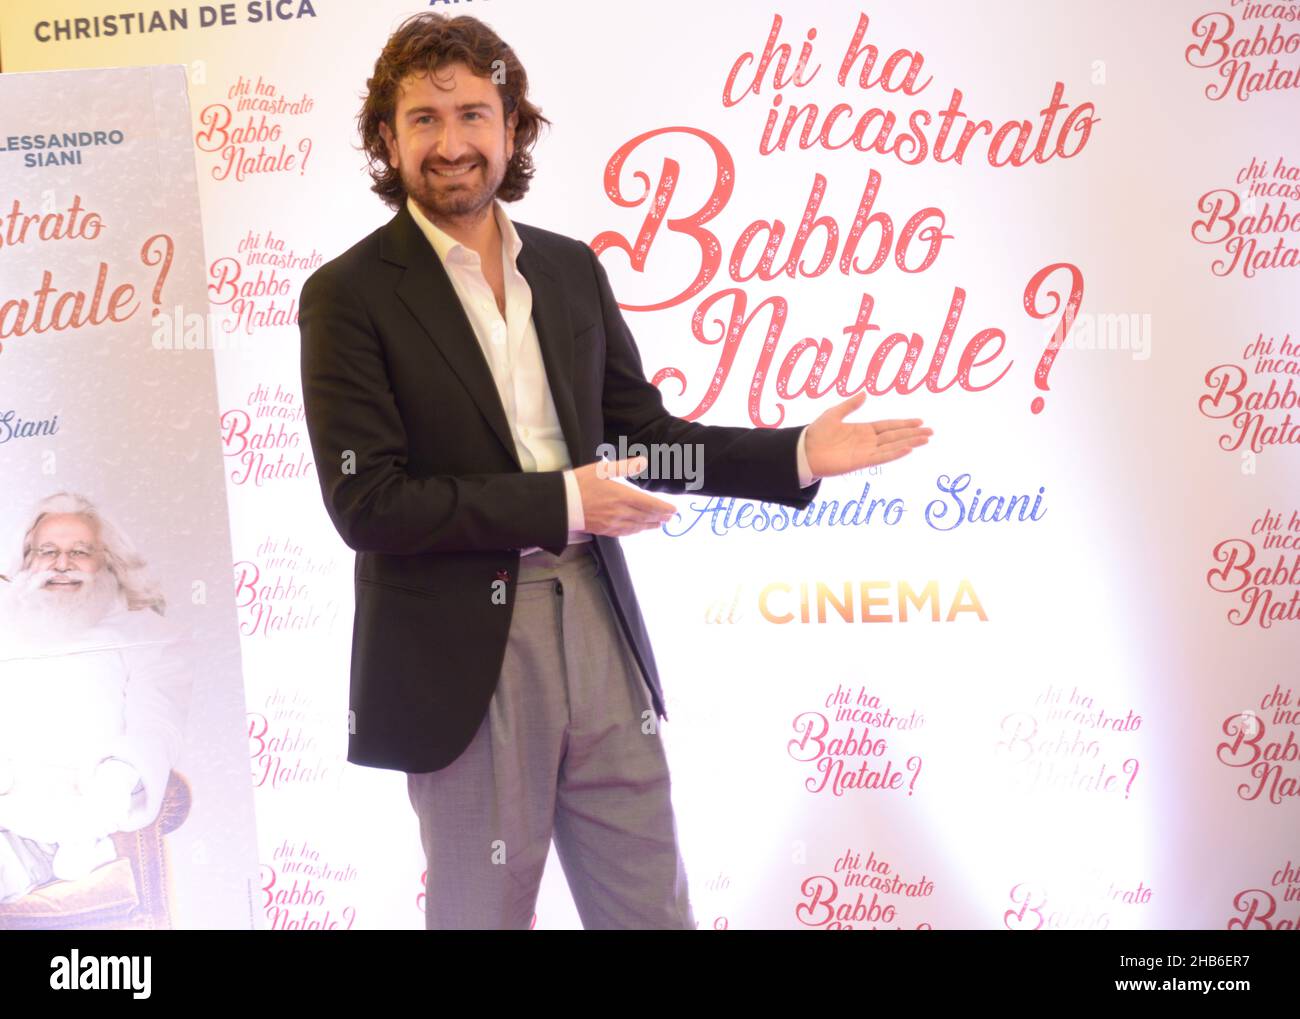 Alessandro Siani pose during a photocall session for the Christmas film 'Chi ha incastrato Babbo Natale?' in Naples, Italy Stock Photo